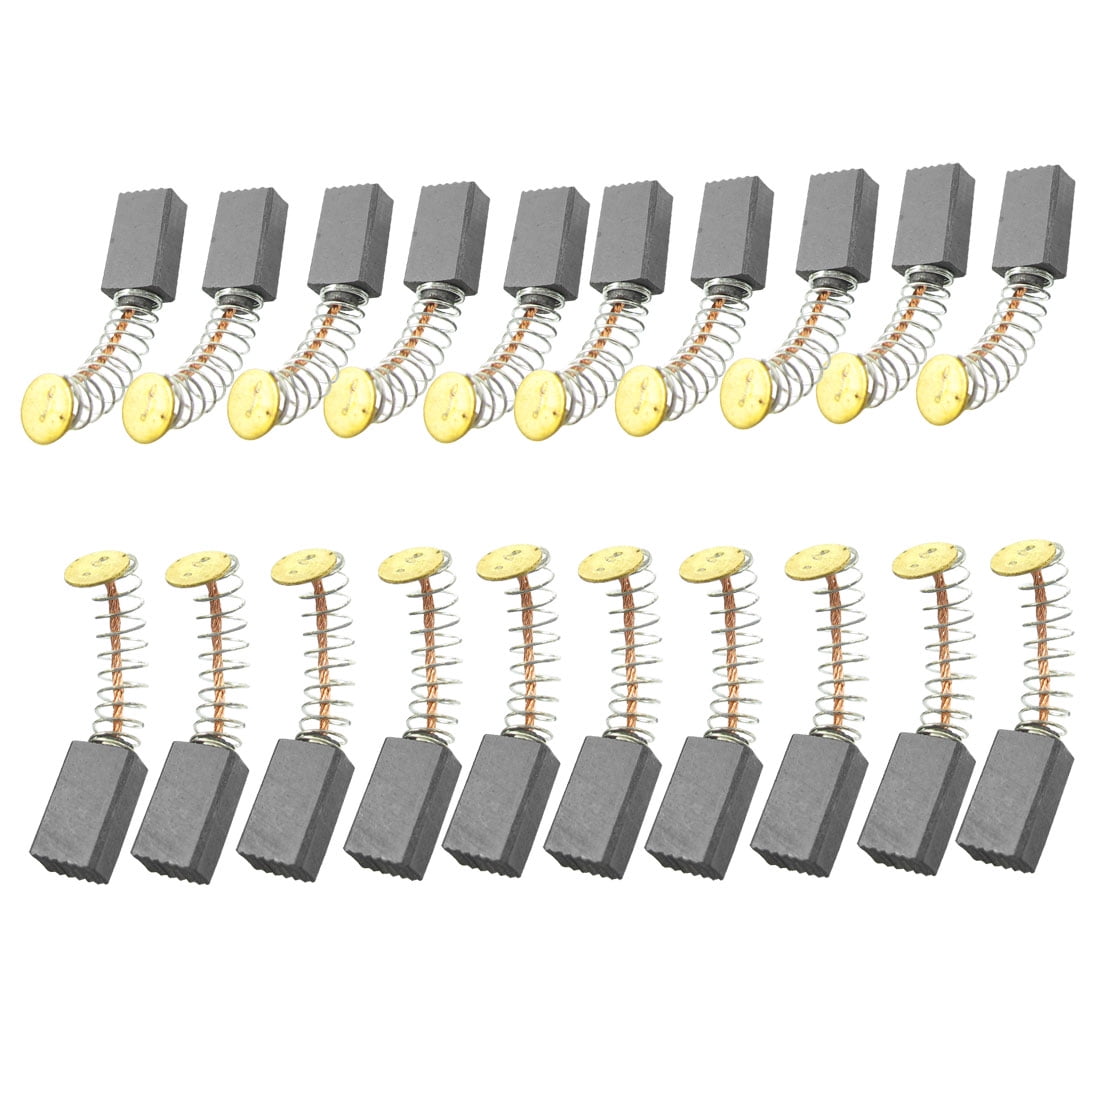 100Pcs RY3D-4 Electric Motor Carbon Brushes 1/4 inch x 7/32 inch x 1/7 inch